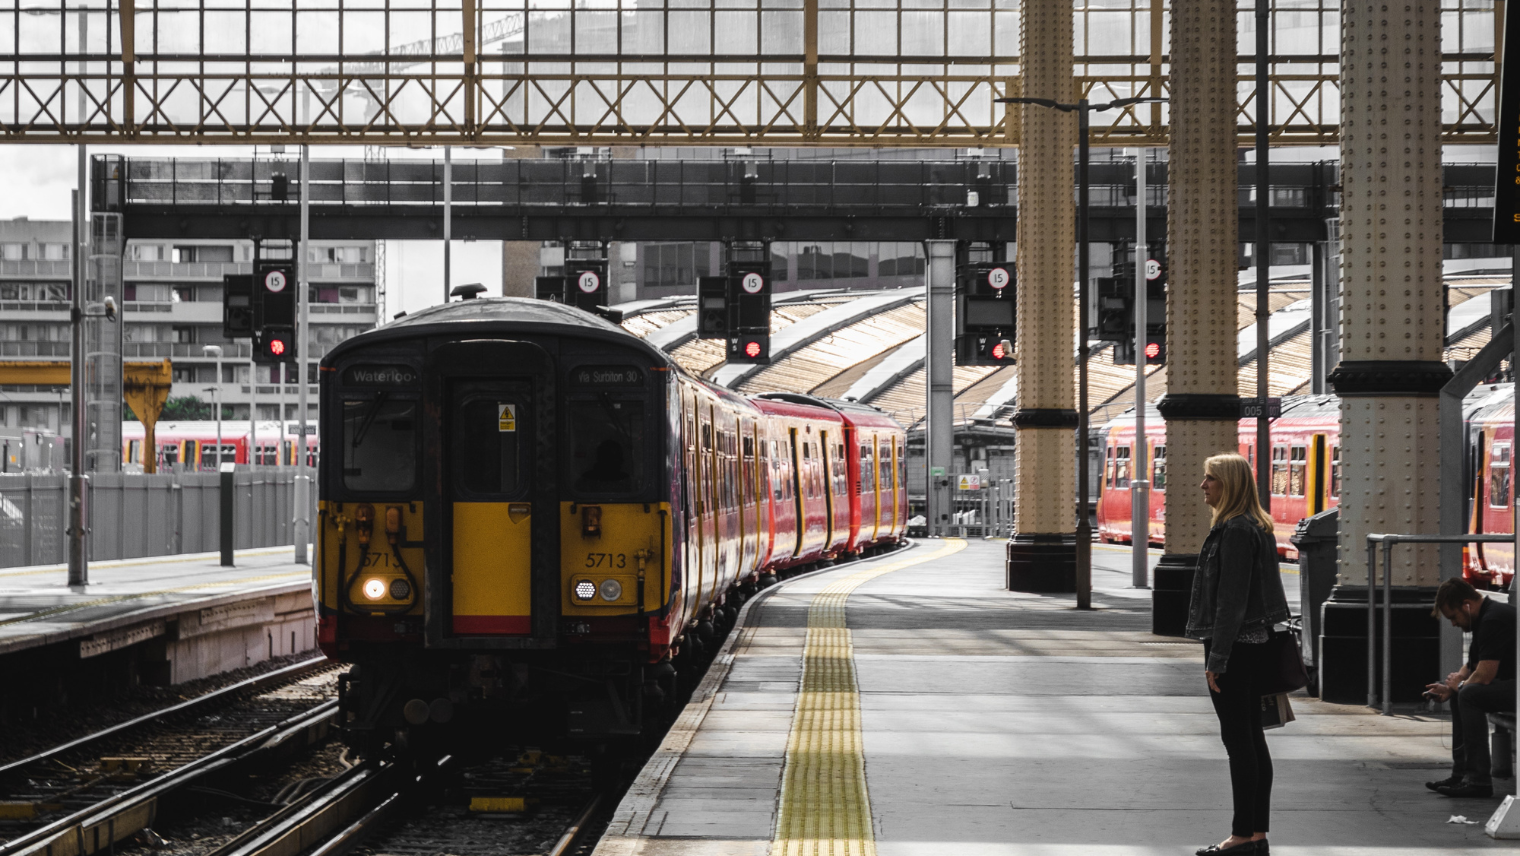 Image of a train pulling in at Waterloo Station